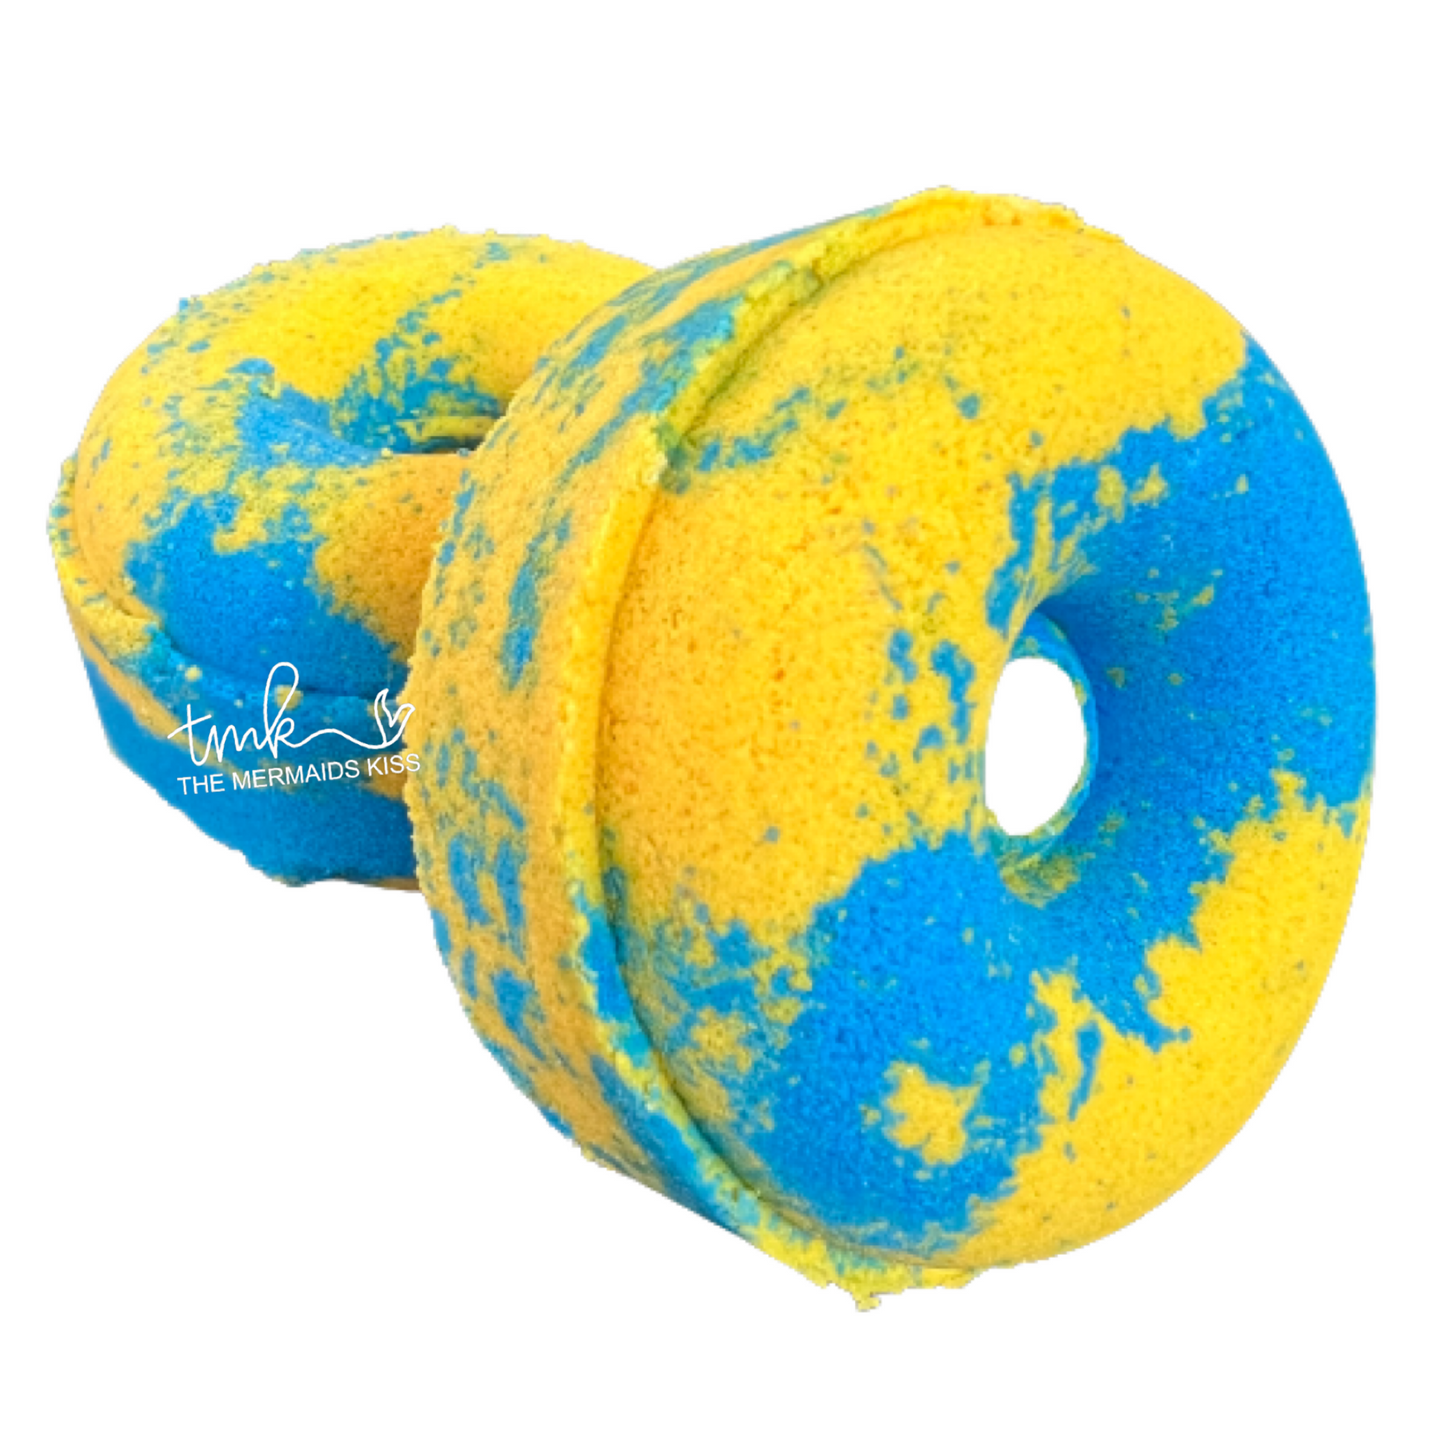 10x Regular Round Bath Bombs LRG or Sml and Donuts WHOLESALE